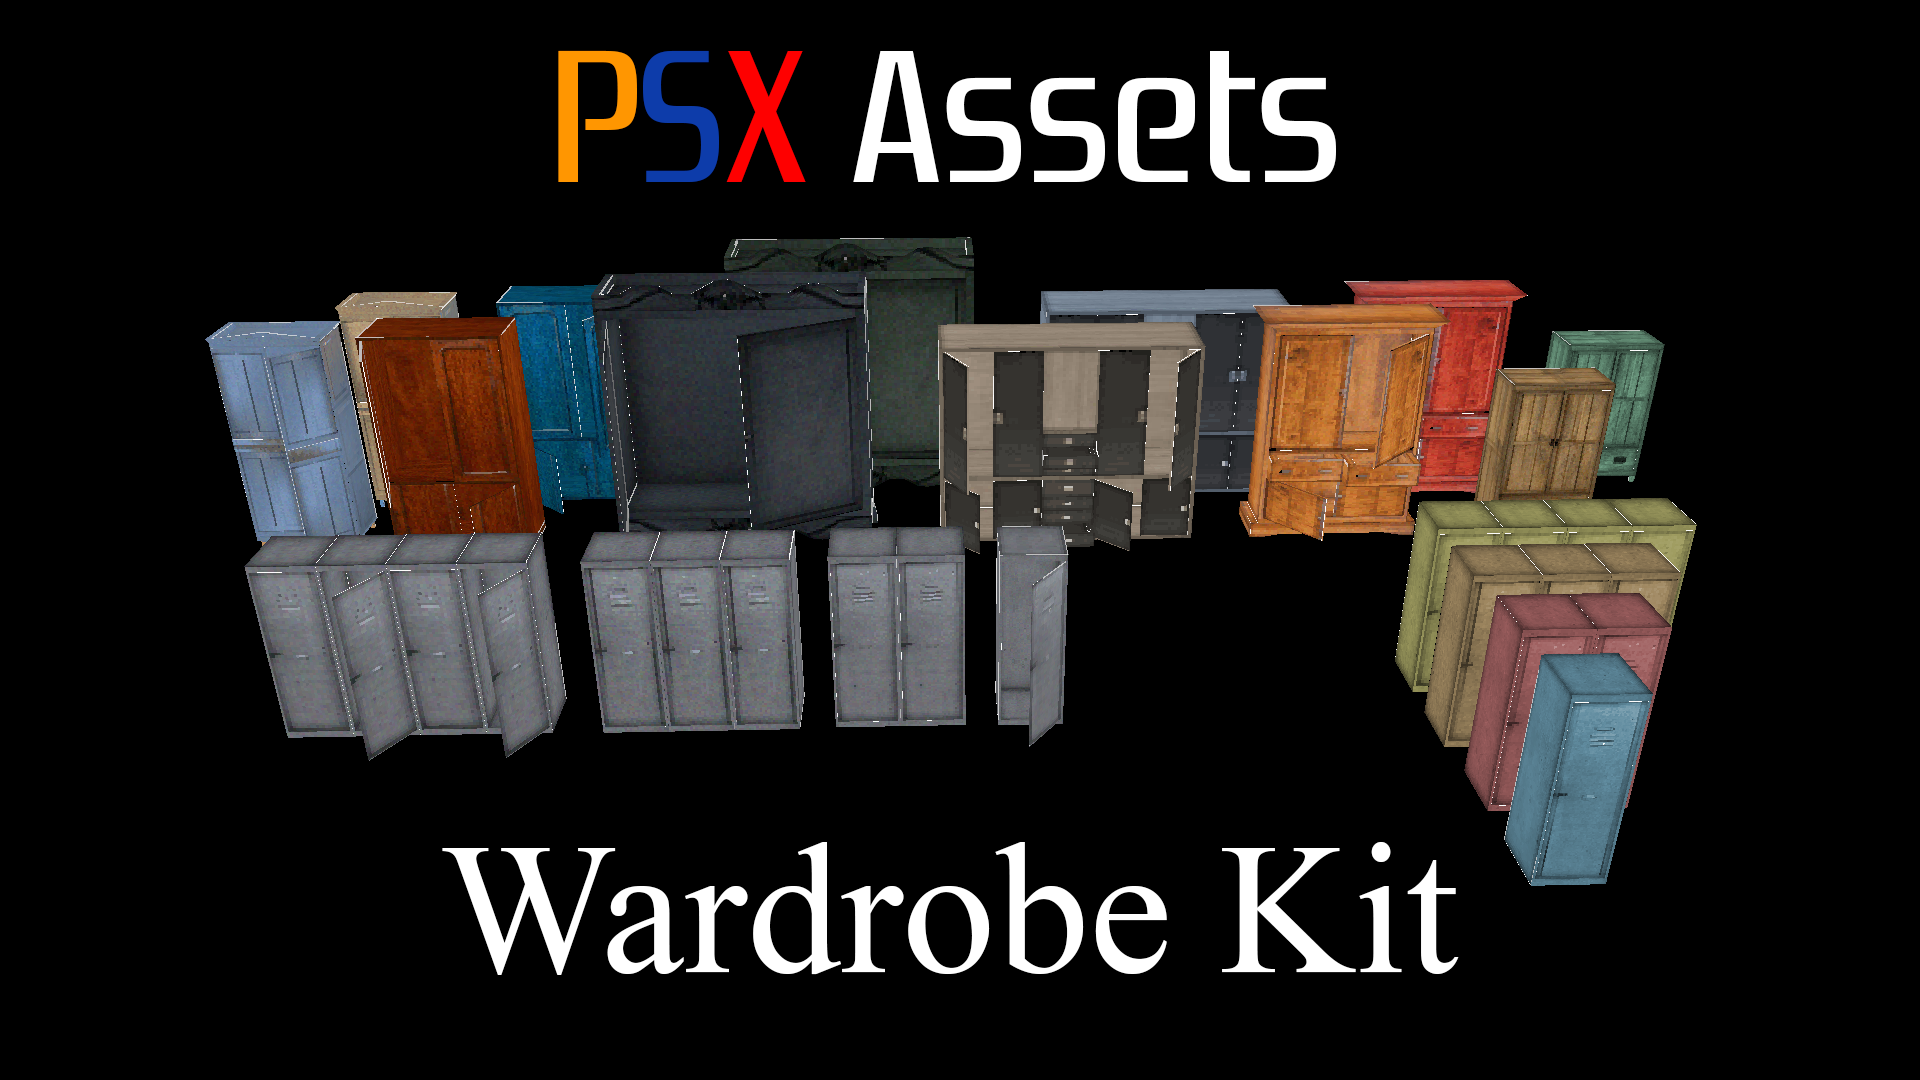 PSX Assets - Wardrobe Kit (Doors and Drawers)